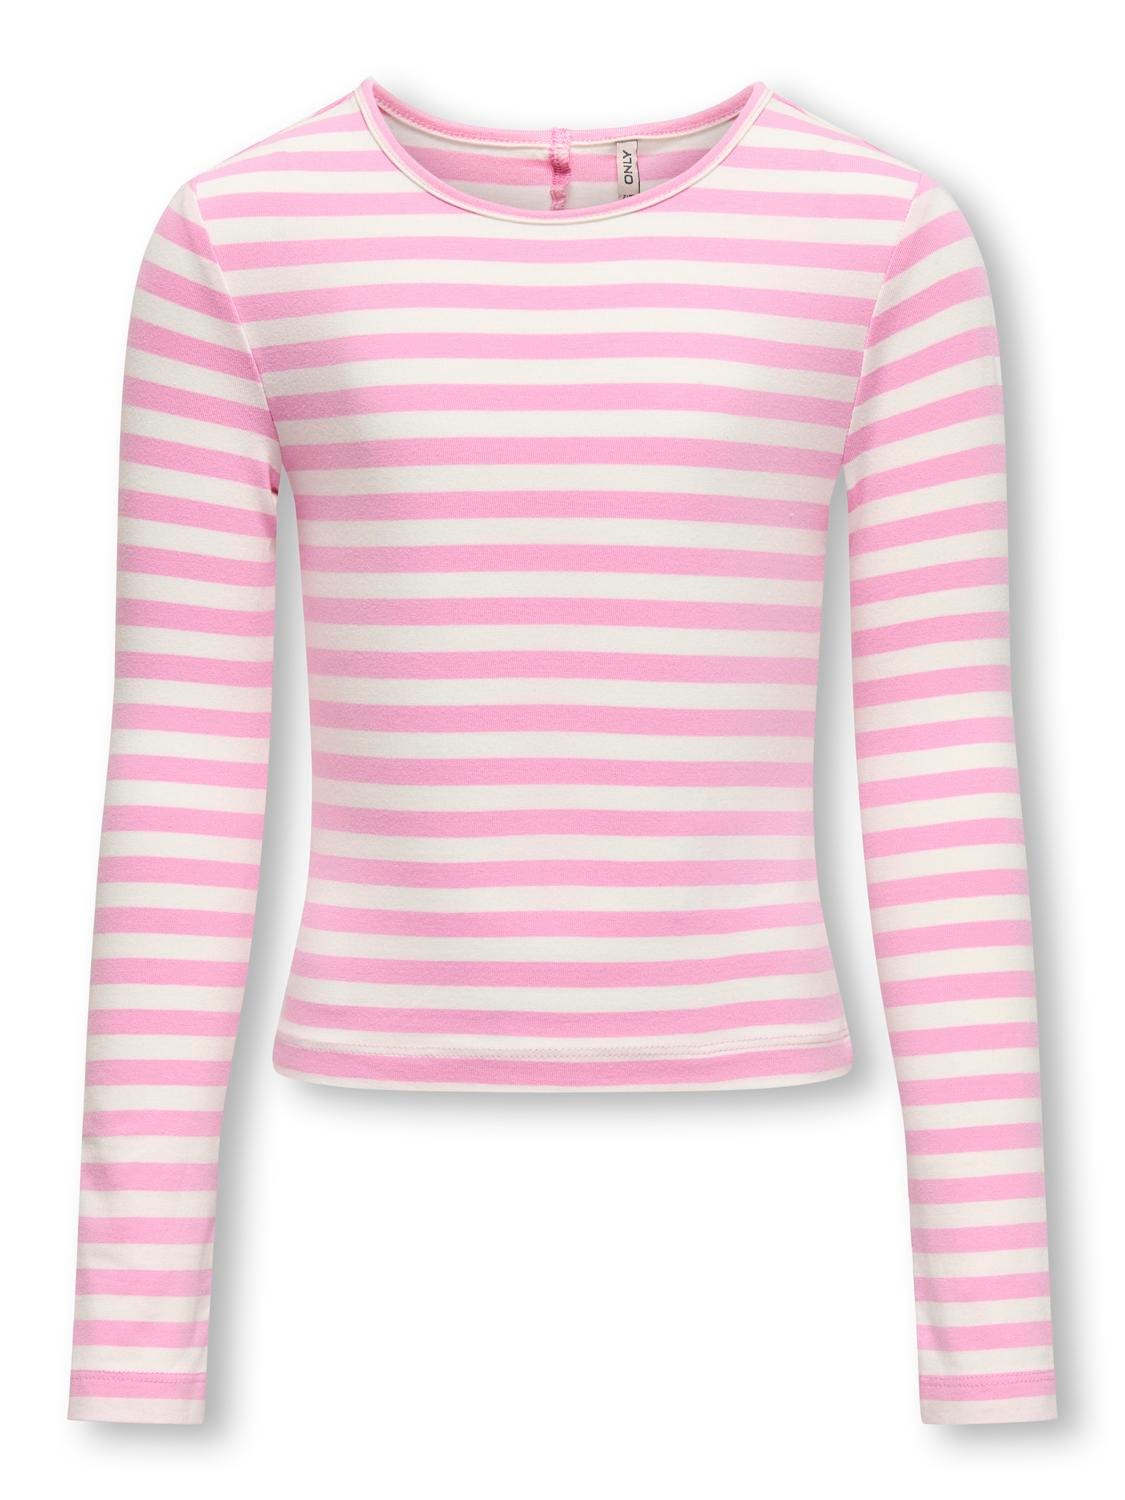 ONLY Top Regular Fit Paricollo -Begonia Pink - 15317871